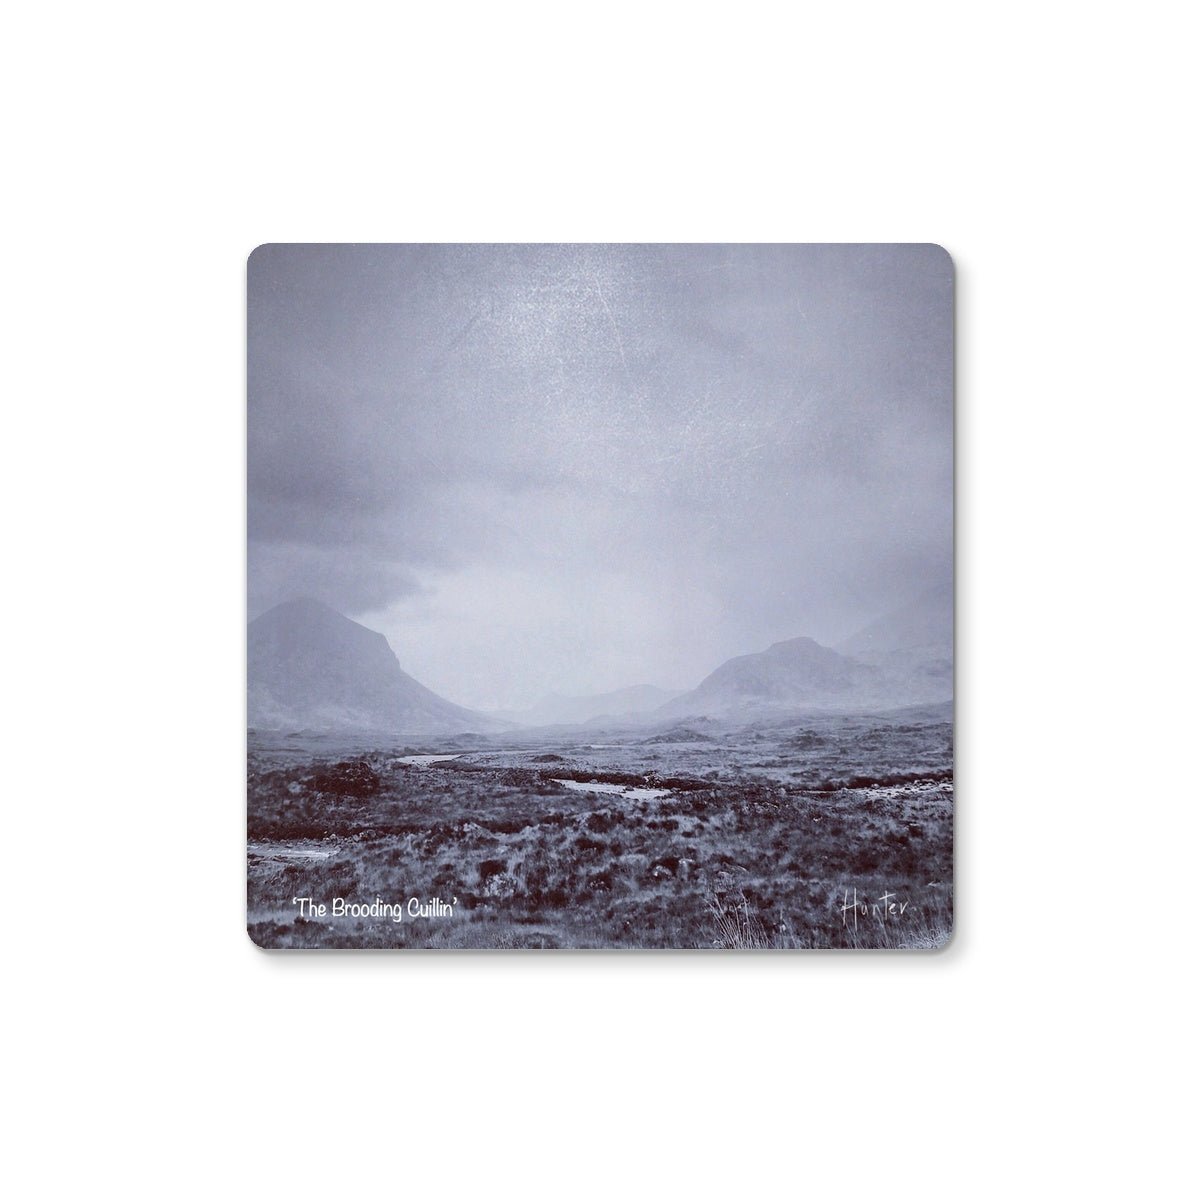 The Brooding Cuillin Skye Art Gifts Coaster-Coasters-Skye Art Gallery-2 Coasters-Paintings, Prints, Homeware, Art Gifts From Scotland By Scottish Artist Kevin Hunter